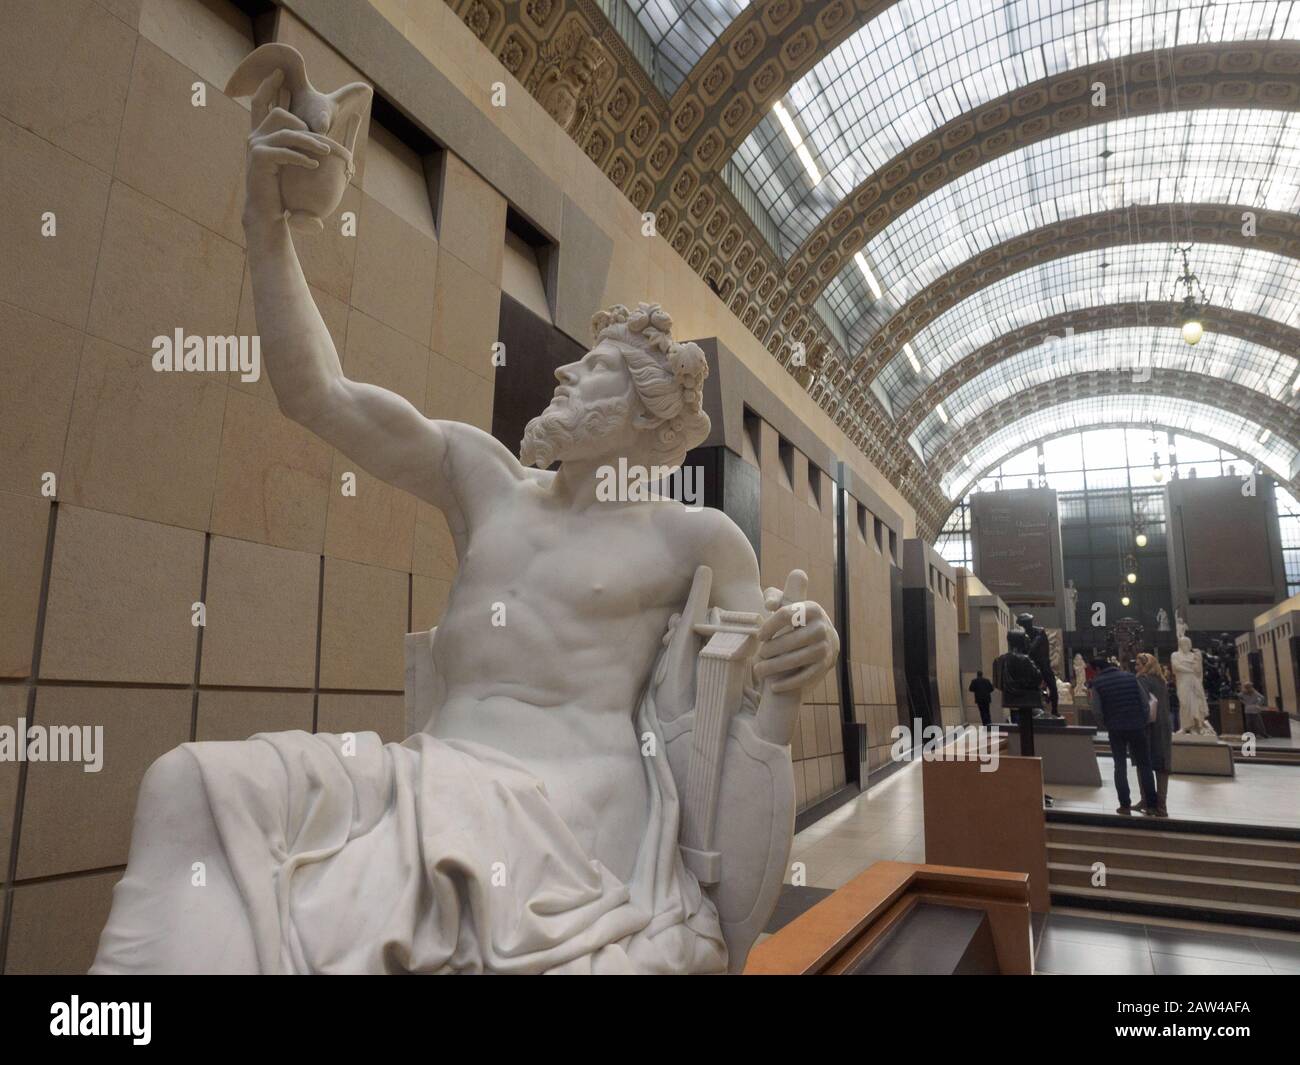 Paris, France - March 19 2019.  Interior of the Musee d'Orsay in Paris, France. The museum houses the largest collection of impressionist and post-imp Stock Photo